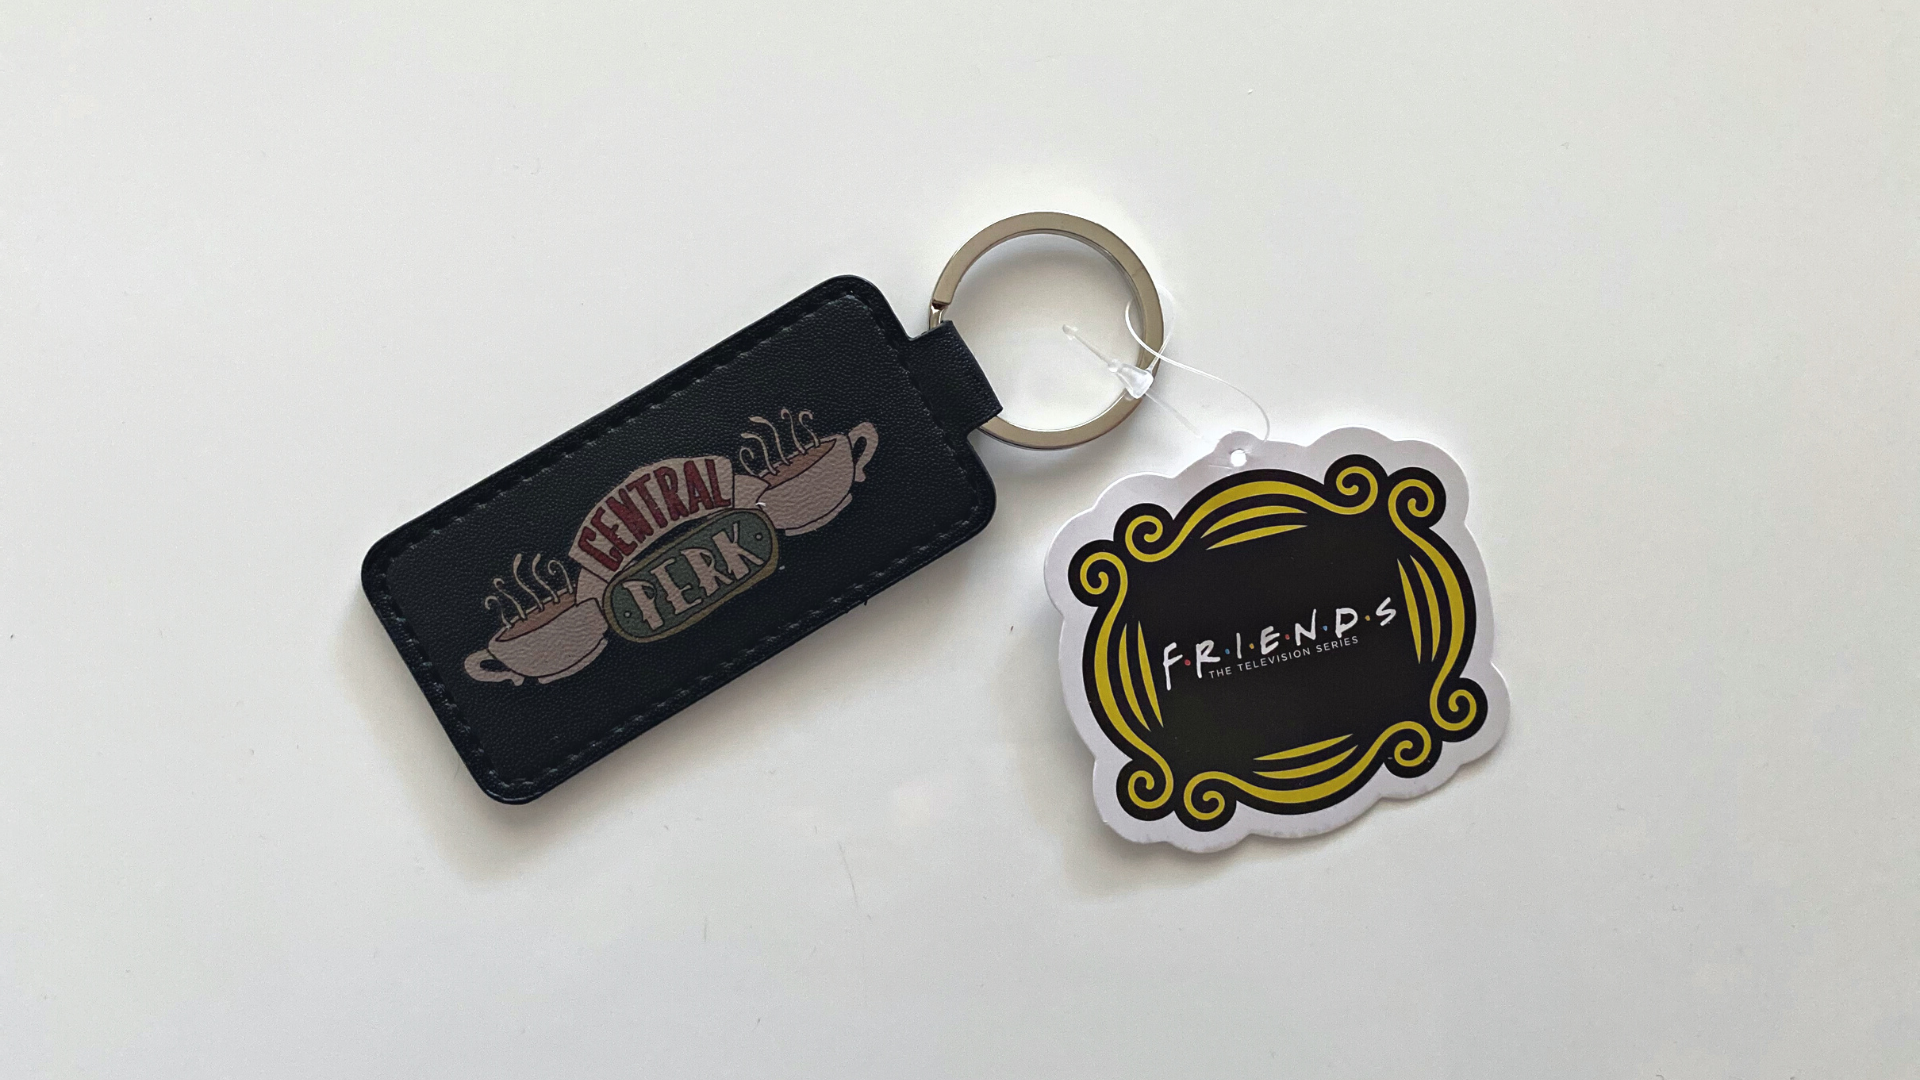 magnet keychain with central perk logo and friends logo